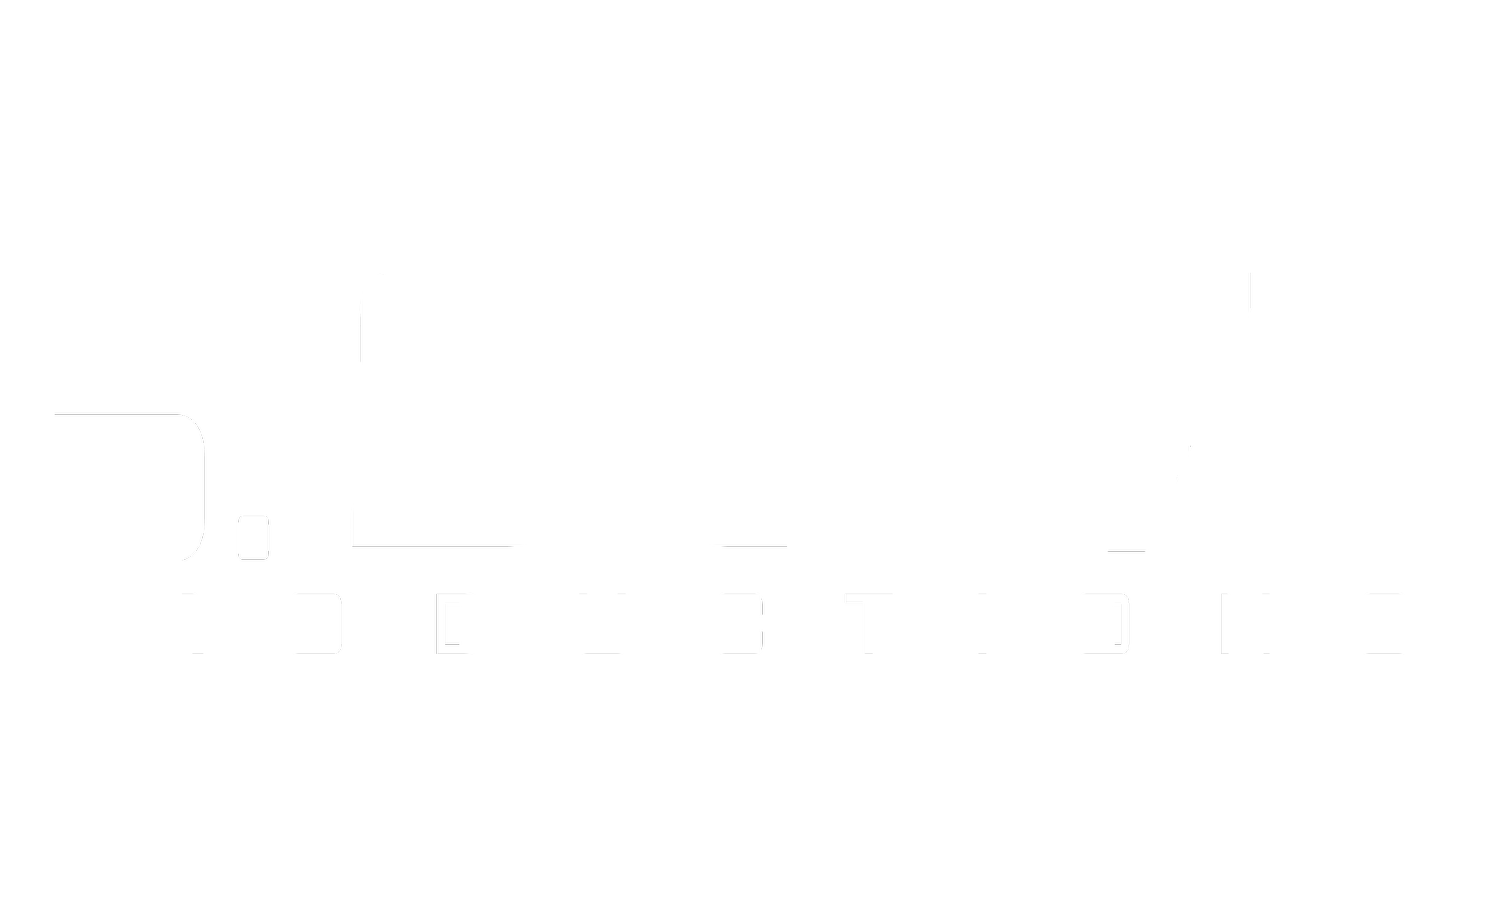 207 Productions